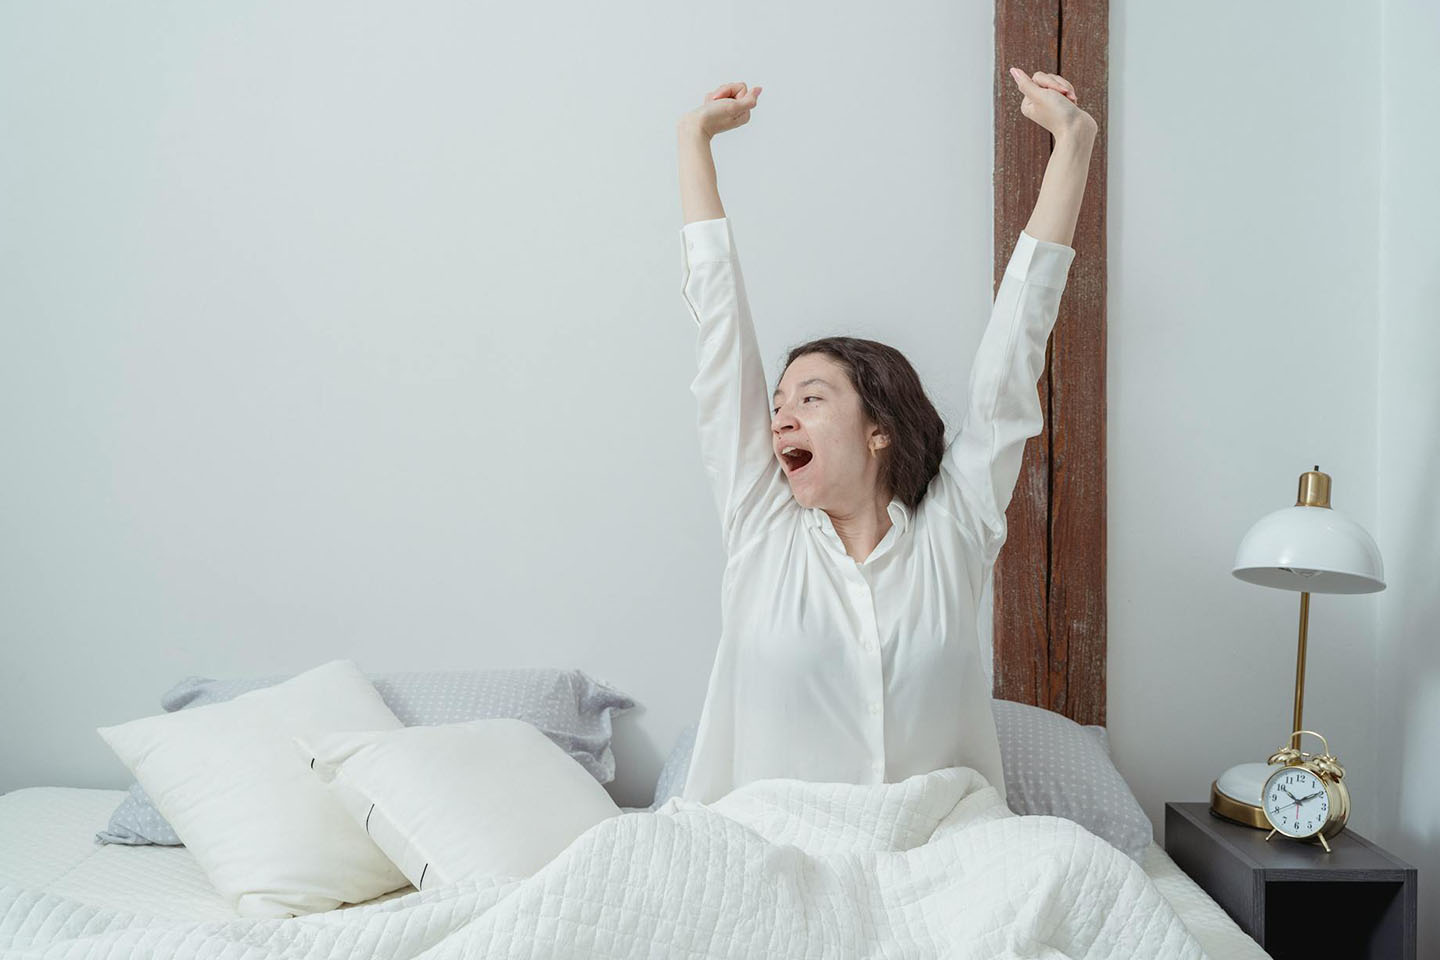 A woman sitting and stretching in bed after waking up